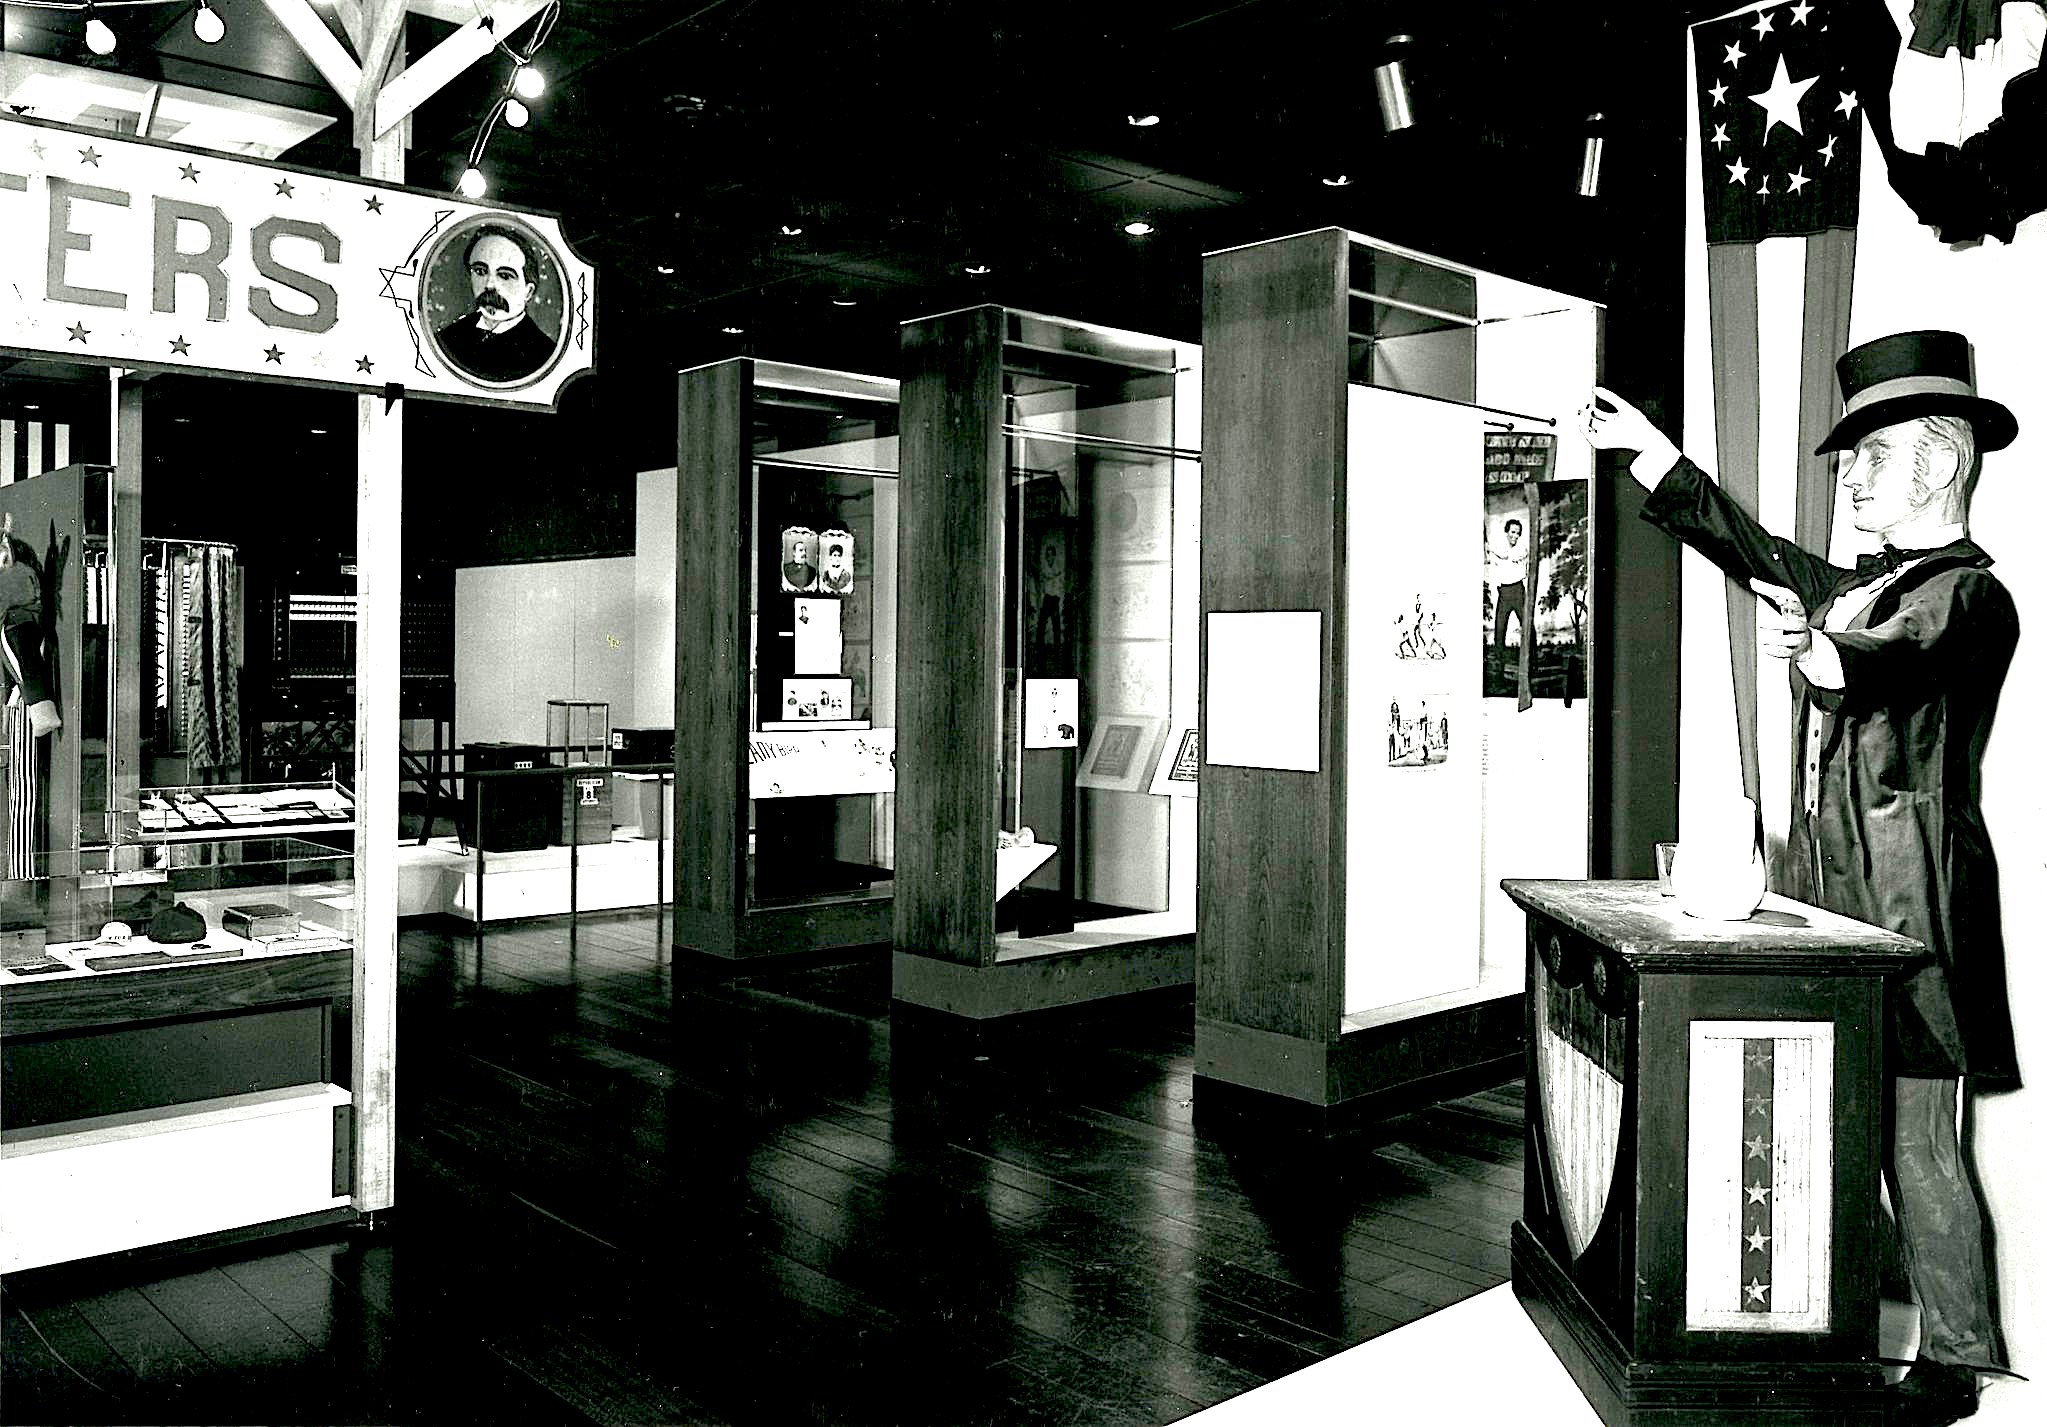 Quest for the Presidency  installation 1968-1970. (National Museum of American History Smithsonian Institution, Flickr, CC BY-NC-SA 2.0)